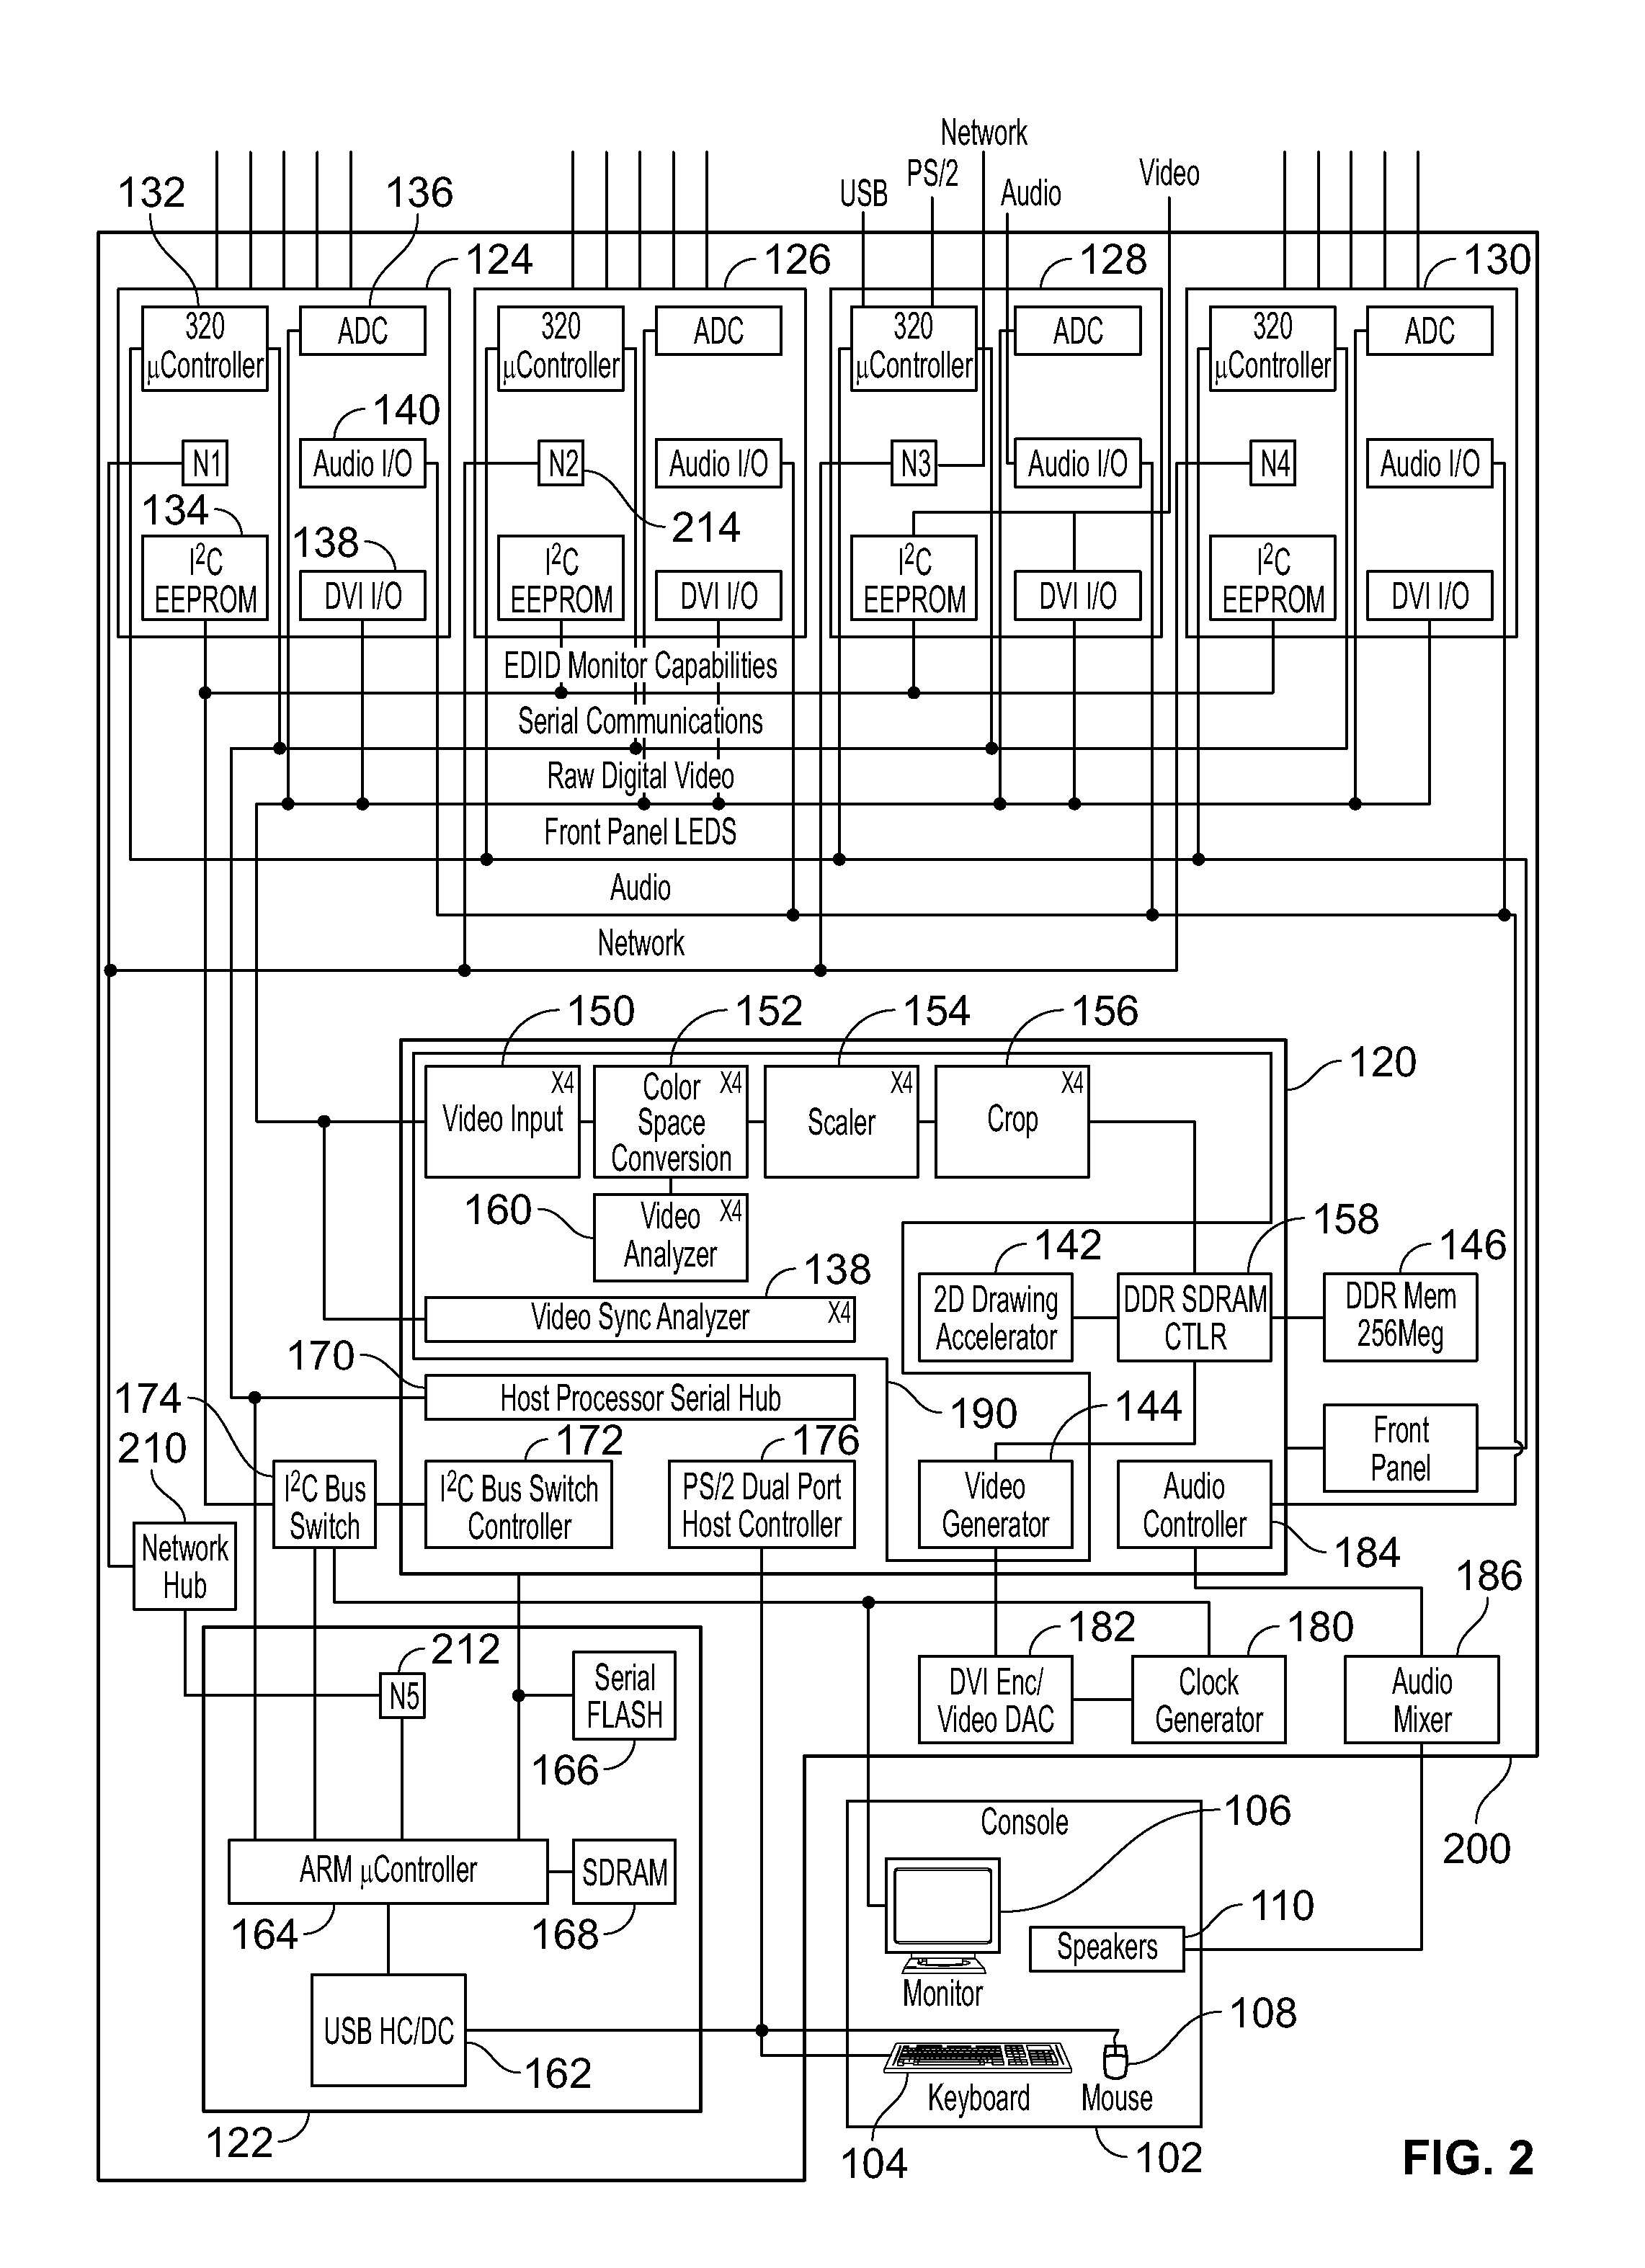 Apparatus and System for Managing Multiple Computers